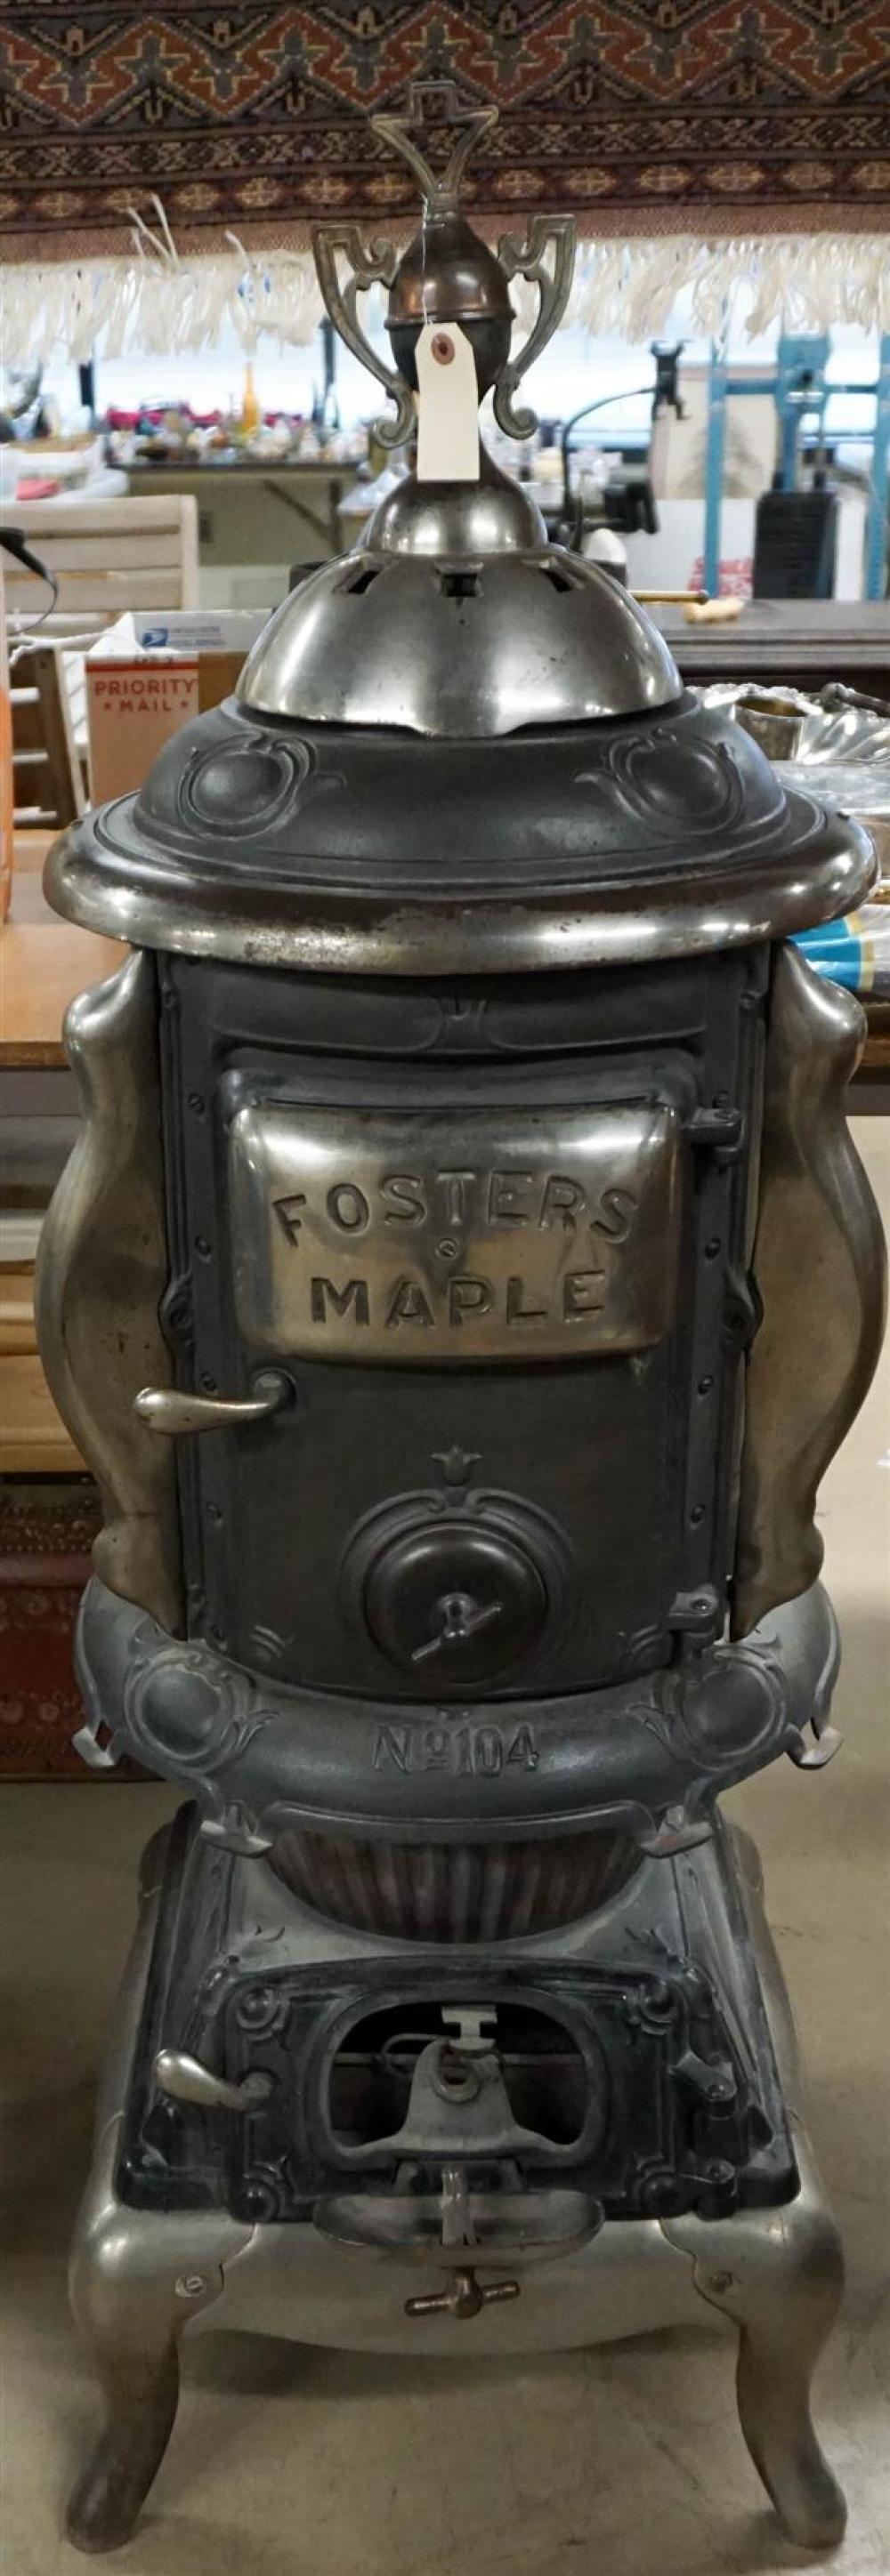 FOSTERS MAPLE NO. 104 CHROME PLATED